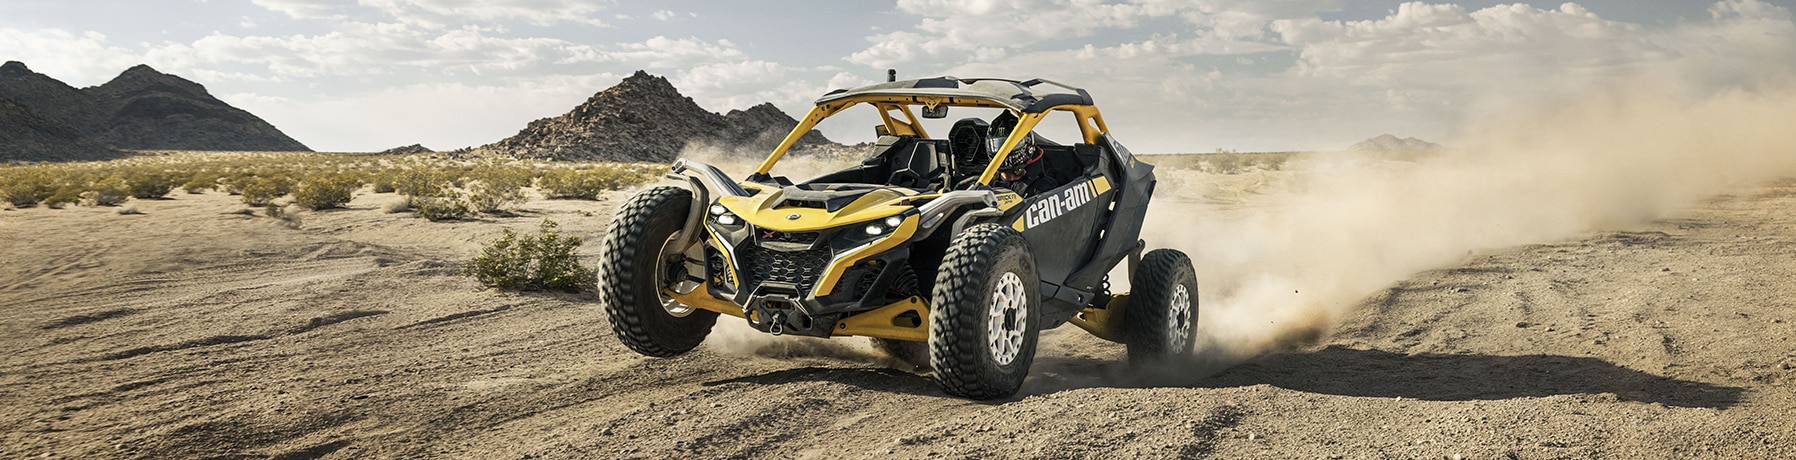 A rider driving a Can-Am Maverick R in the desert